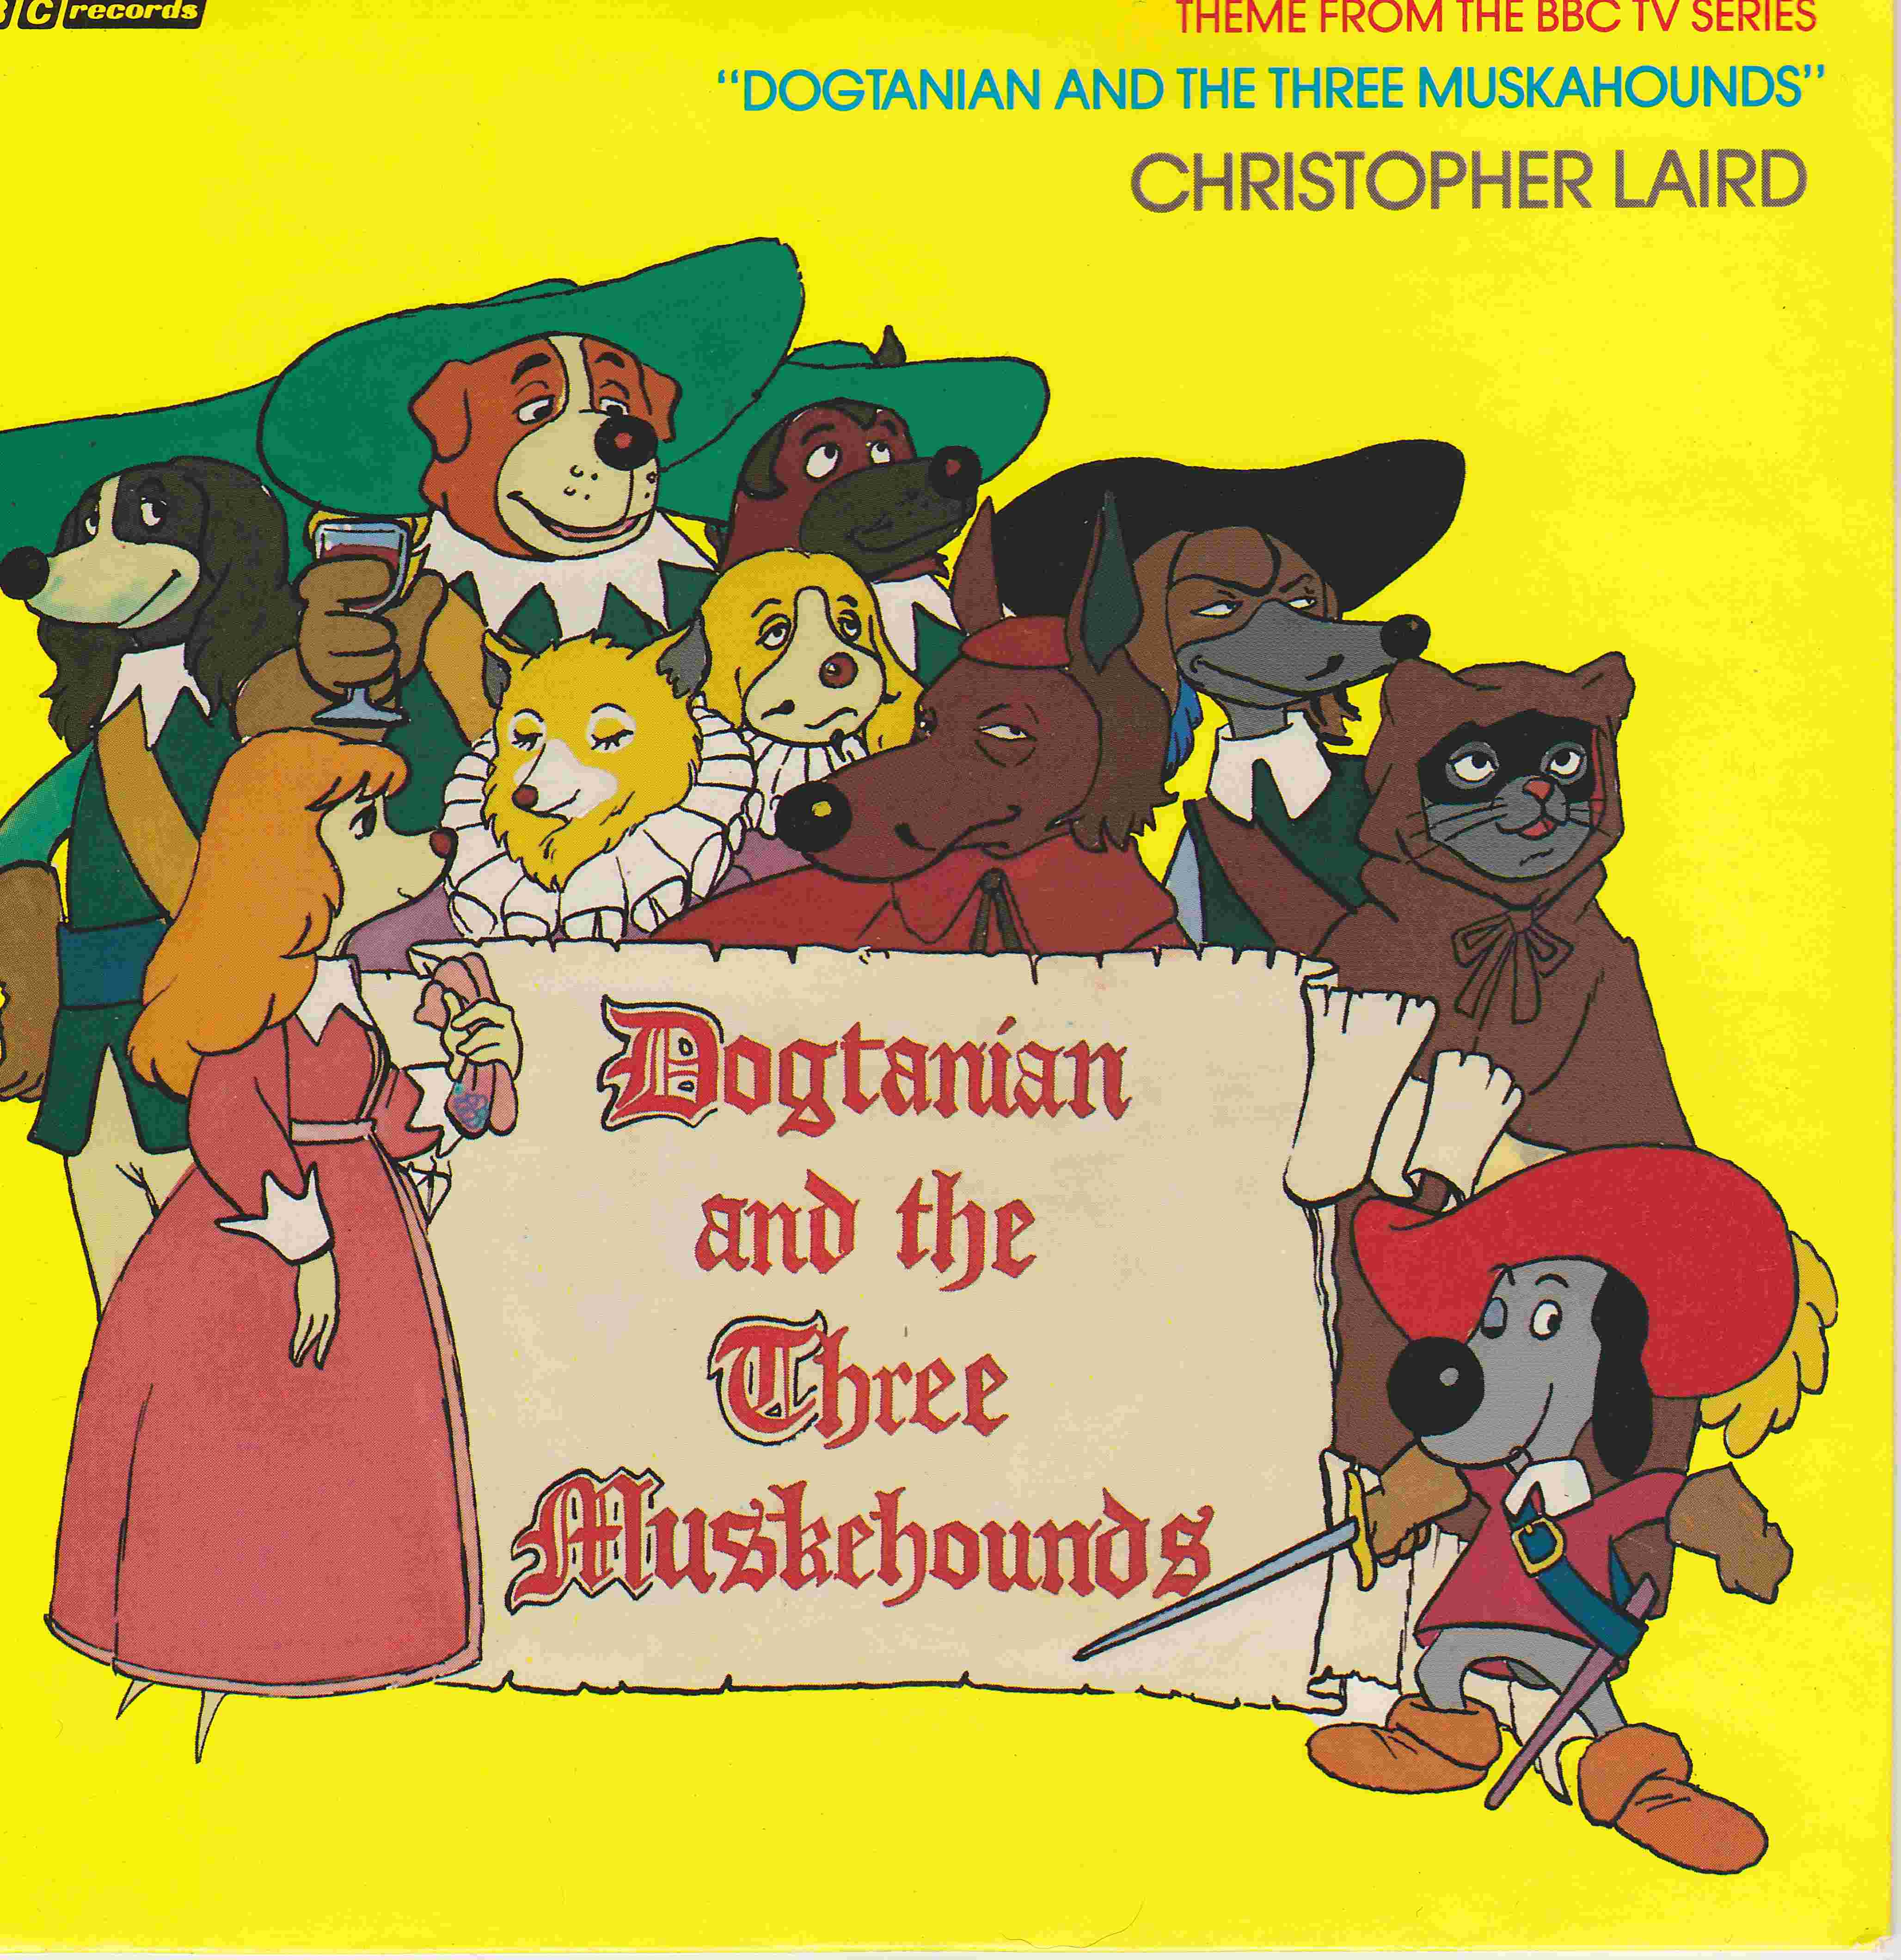 Picture of Dogtanian and the three muskehounds by artist Christopher Laird / G & M Orchestra from the BBC singles - Records and Tapes library